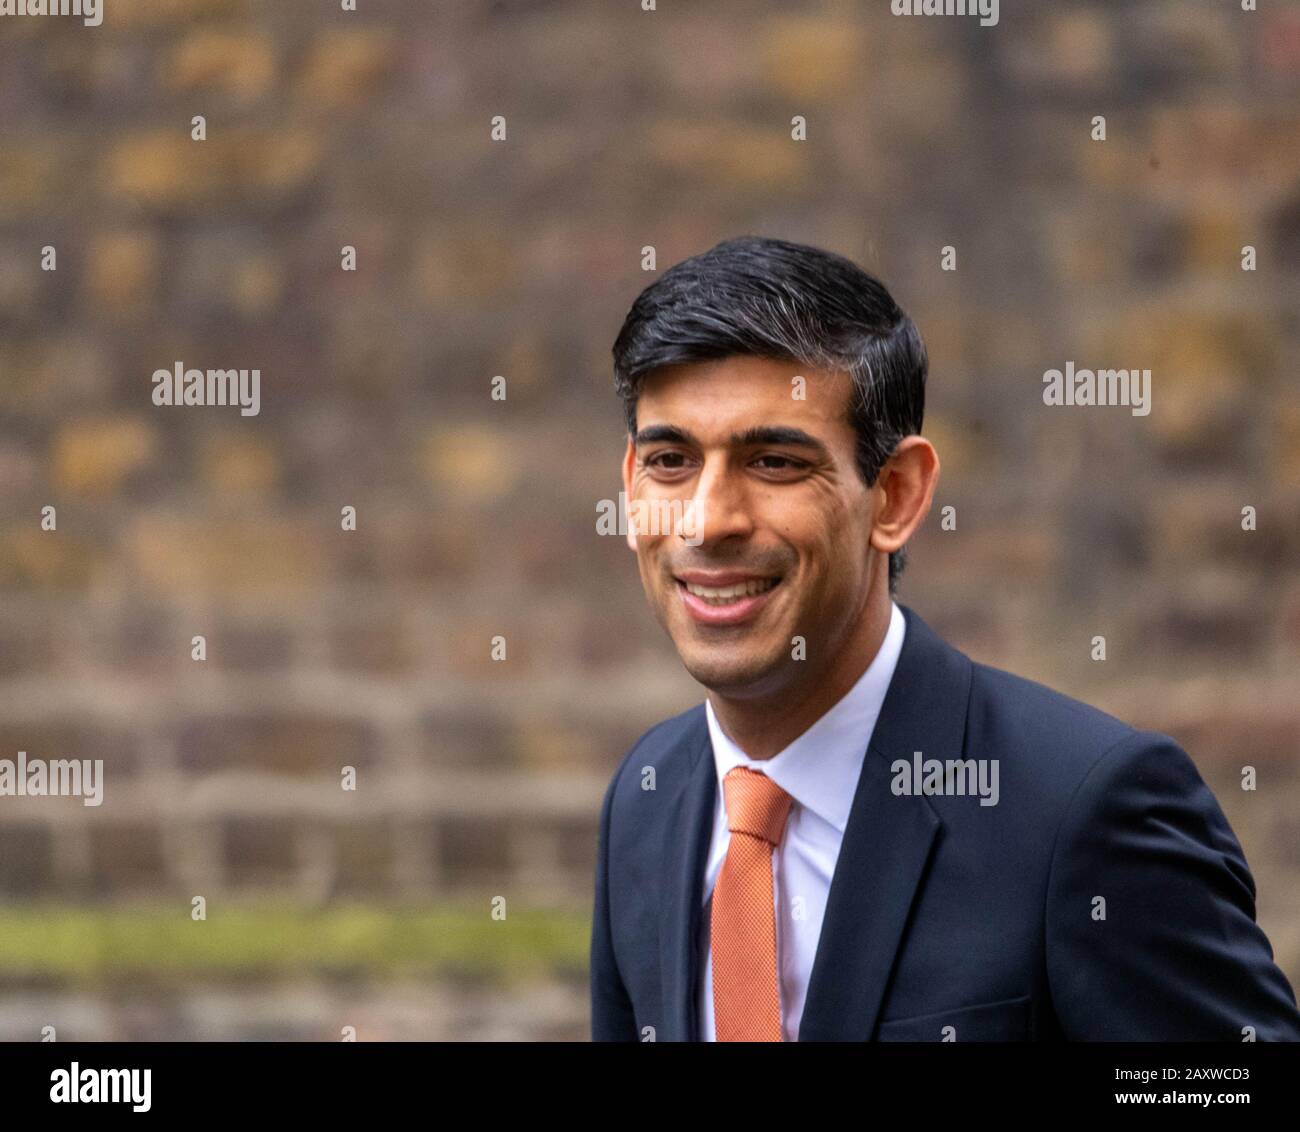 London, UK. 13th Feb, 2020. Rt Hon Rishi Sunak MP arrives to be appointed as Chancellor of the Exchequer at 10 Downing Street, London following the surprise resignation of Sajid Javid as part of the cabinet reshuffle Credit: Ian Davidson/Alamy Live News Stock Photo